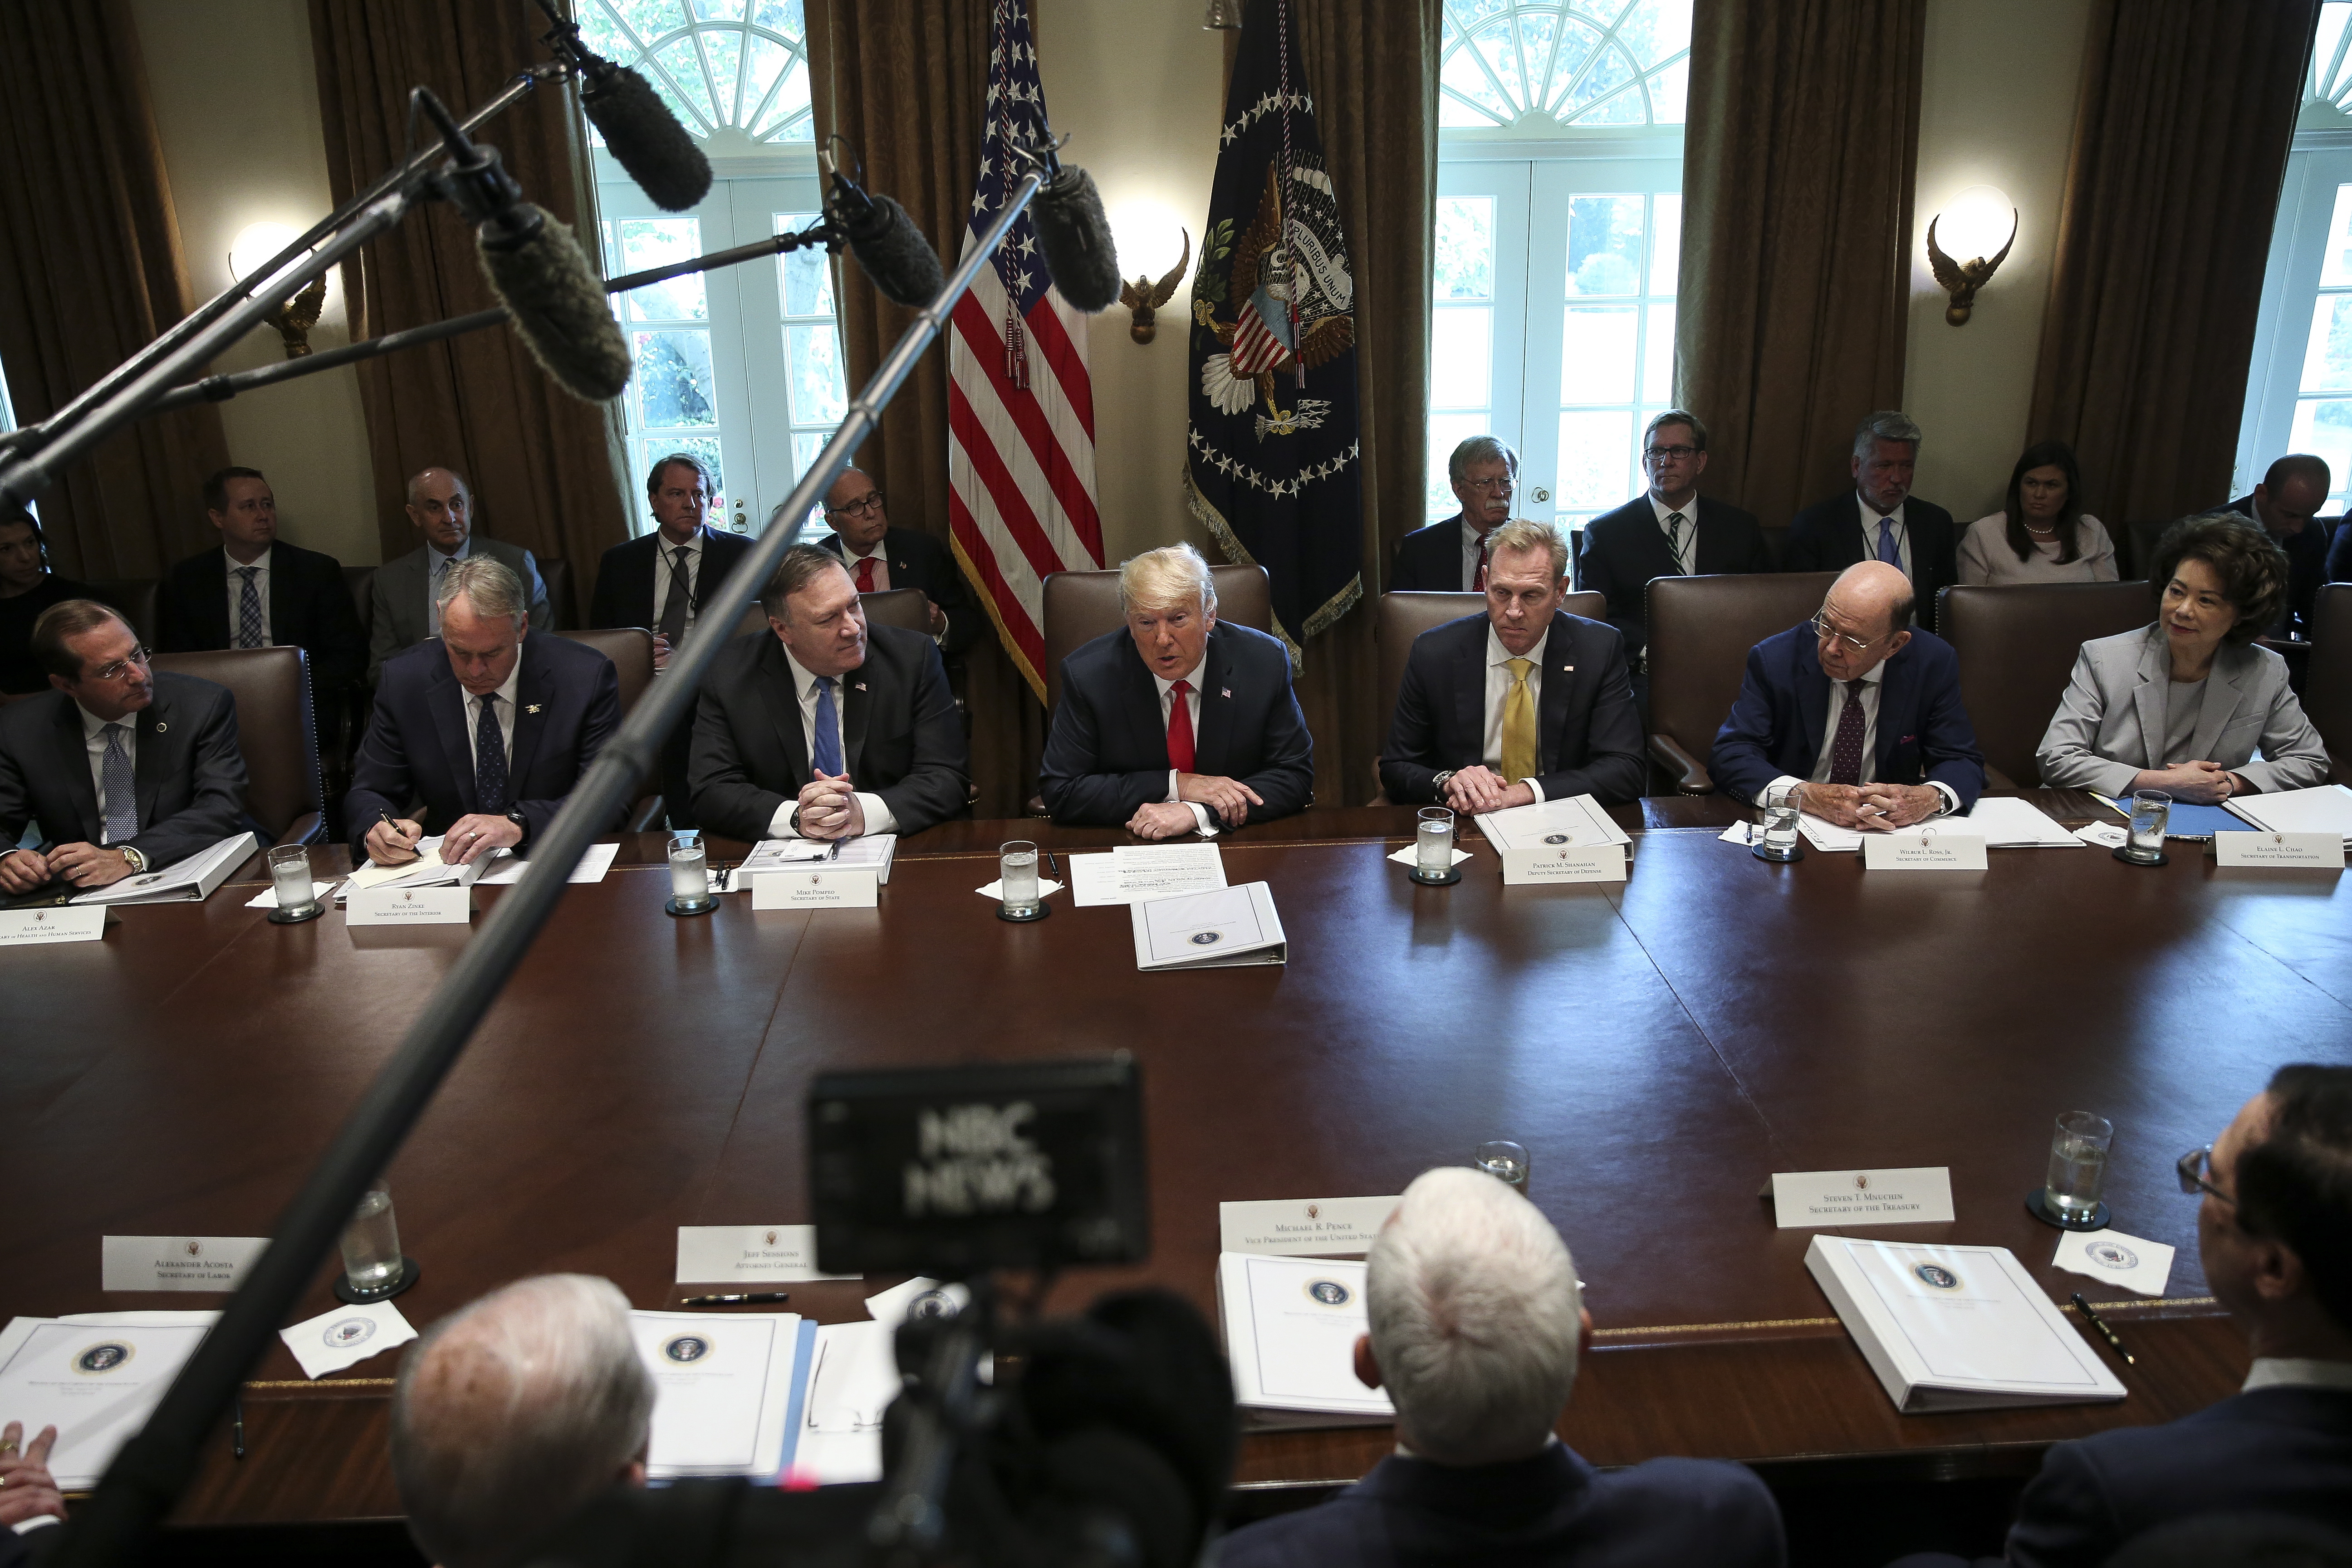 epa06952980 US President Donald J. Trump (C) speaks during a Cabinet Meeting in the Cabinet Room of the White House in Washington DC, USA, 16 August 2018. US President Donald J. Trump hosts a cabinet meeting.  EPA/Oliver Contreras / POOL